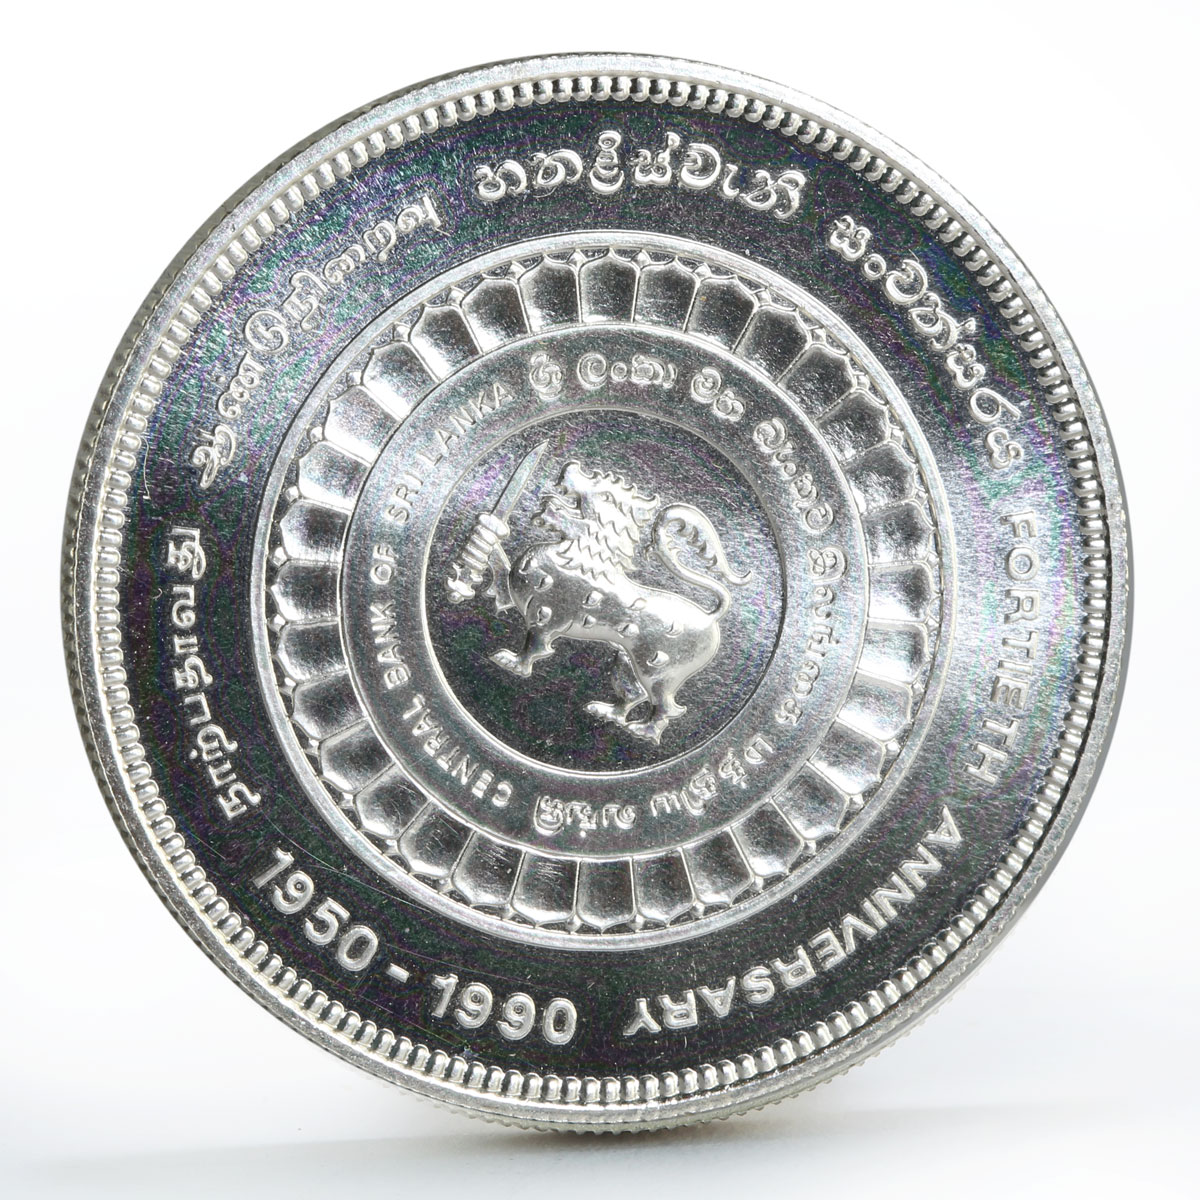 Sri Lanka 500 rupees 40th Anniversary of the National BAnk silver coin 1990